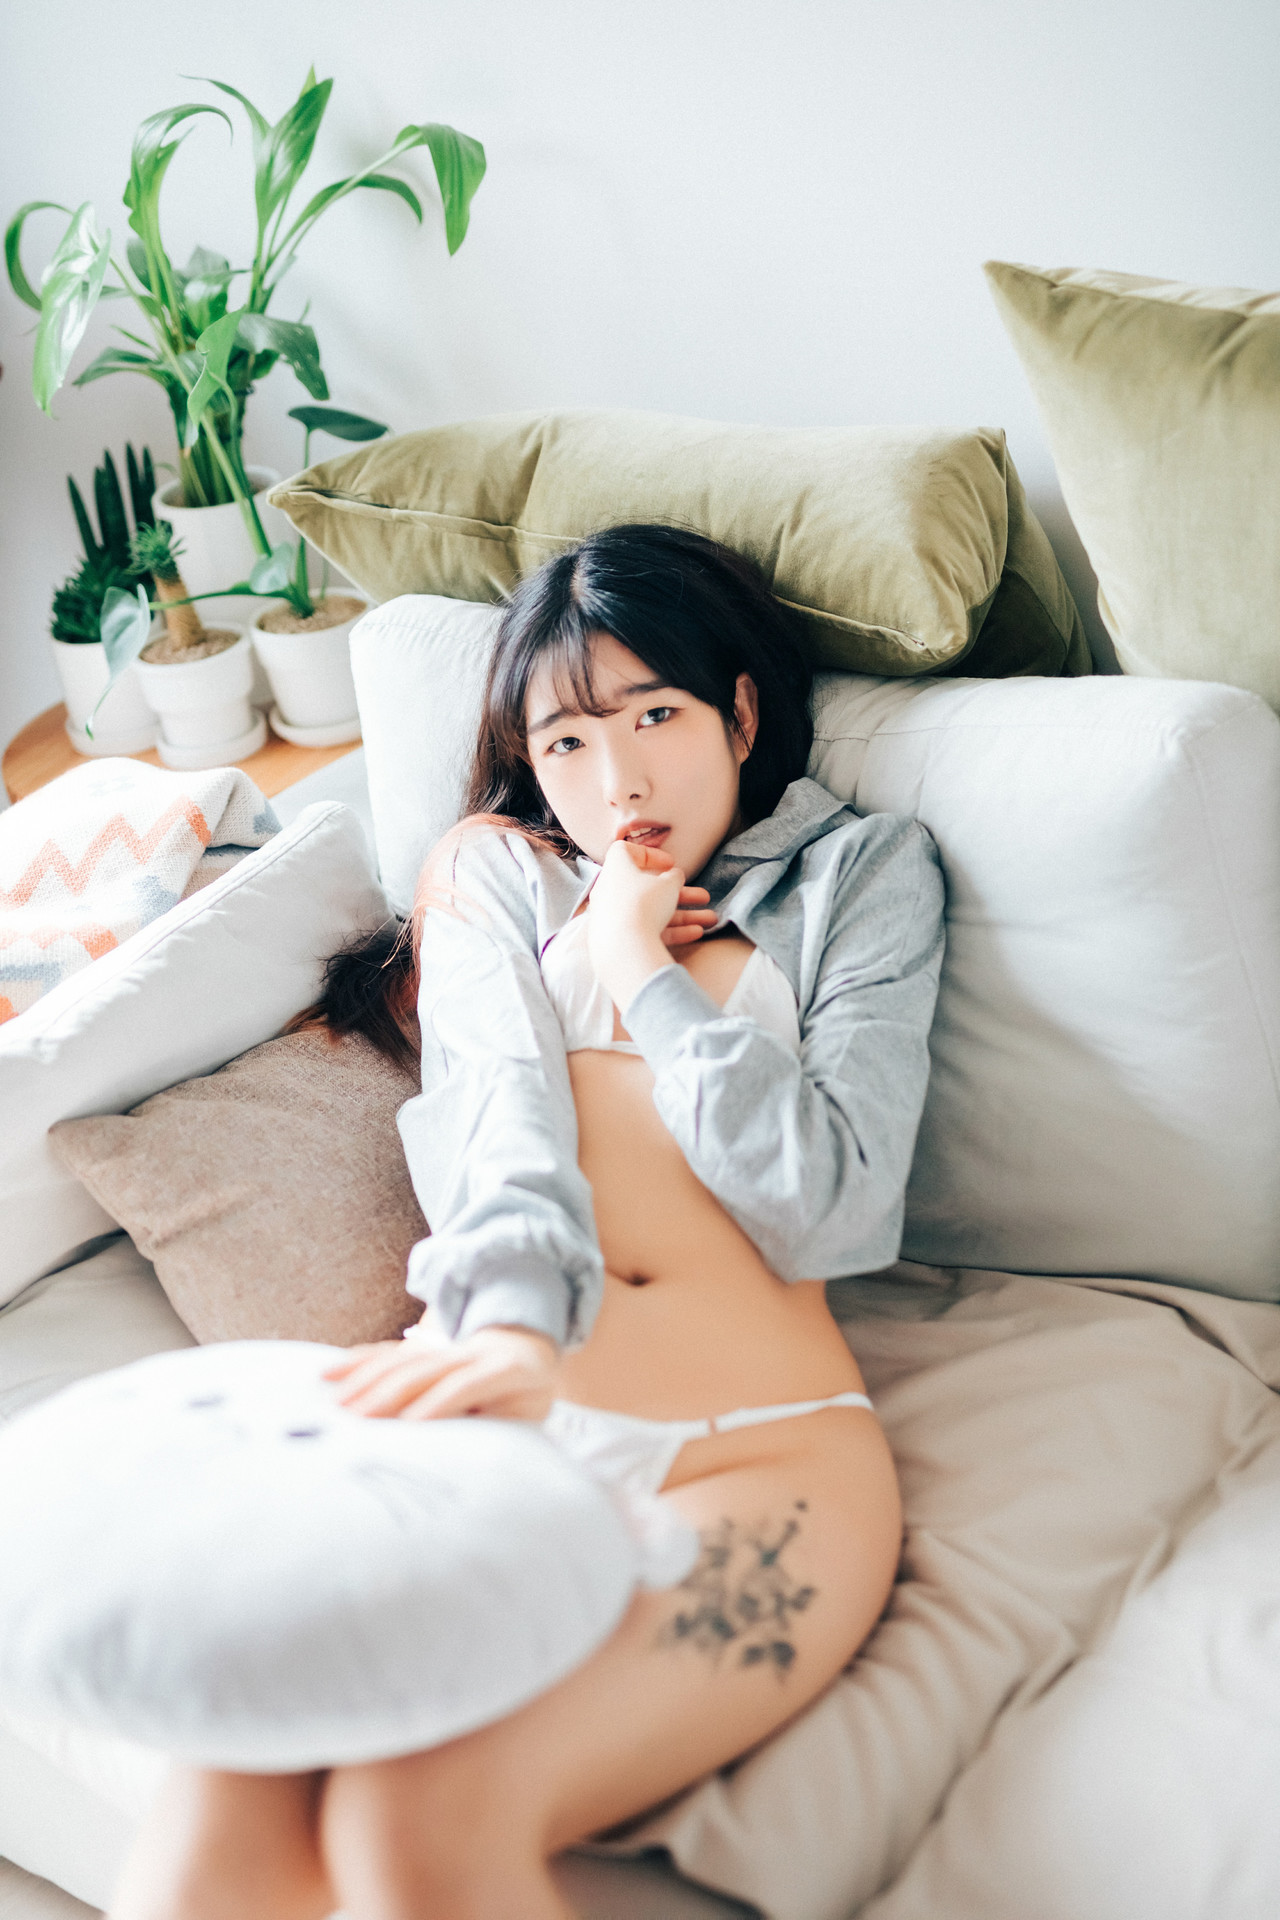 Sonson 손손, [Loozy] Date at home (+S Ver) Set.01(4)